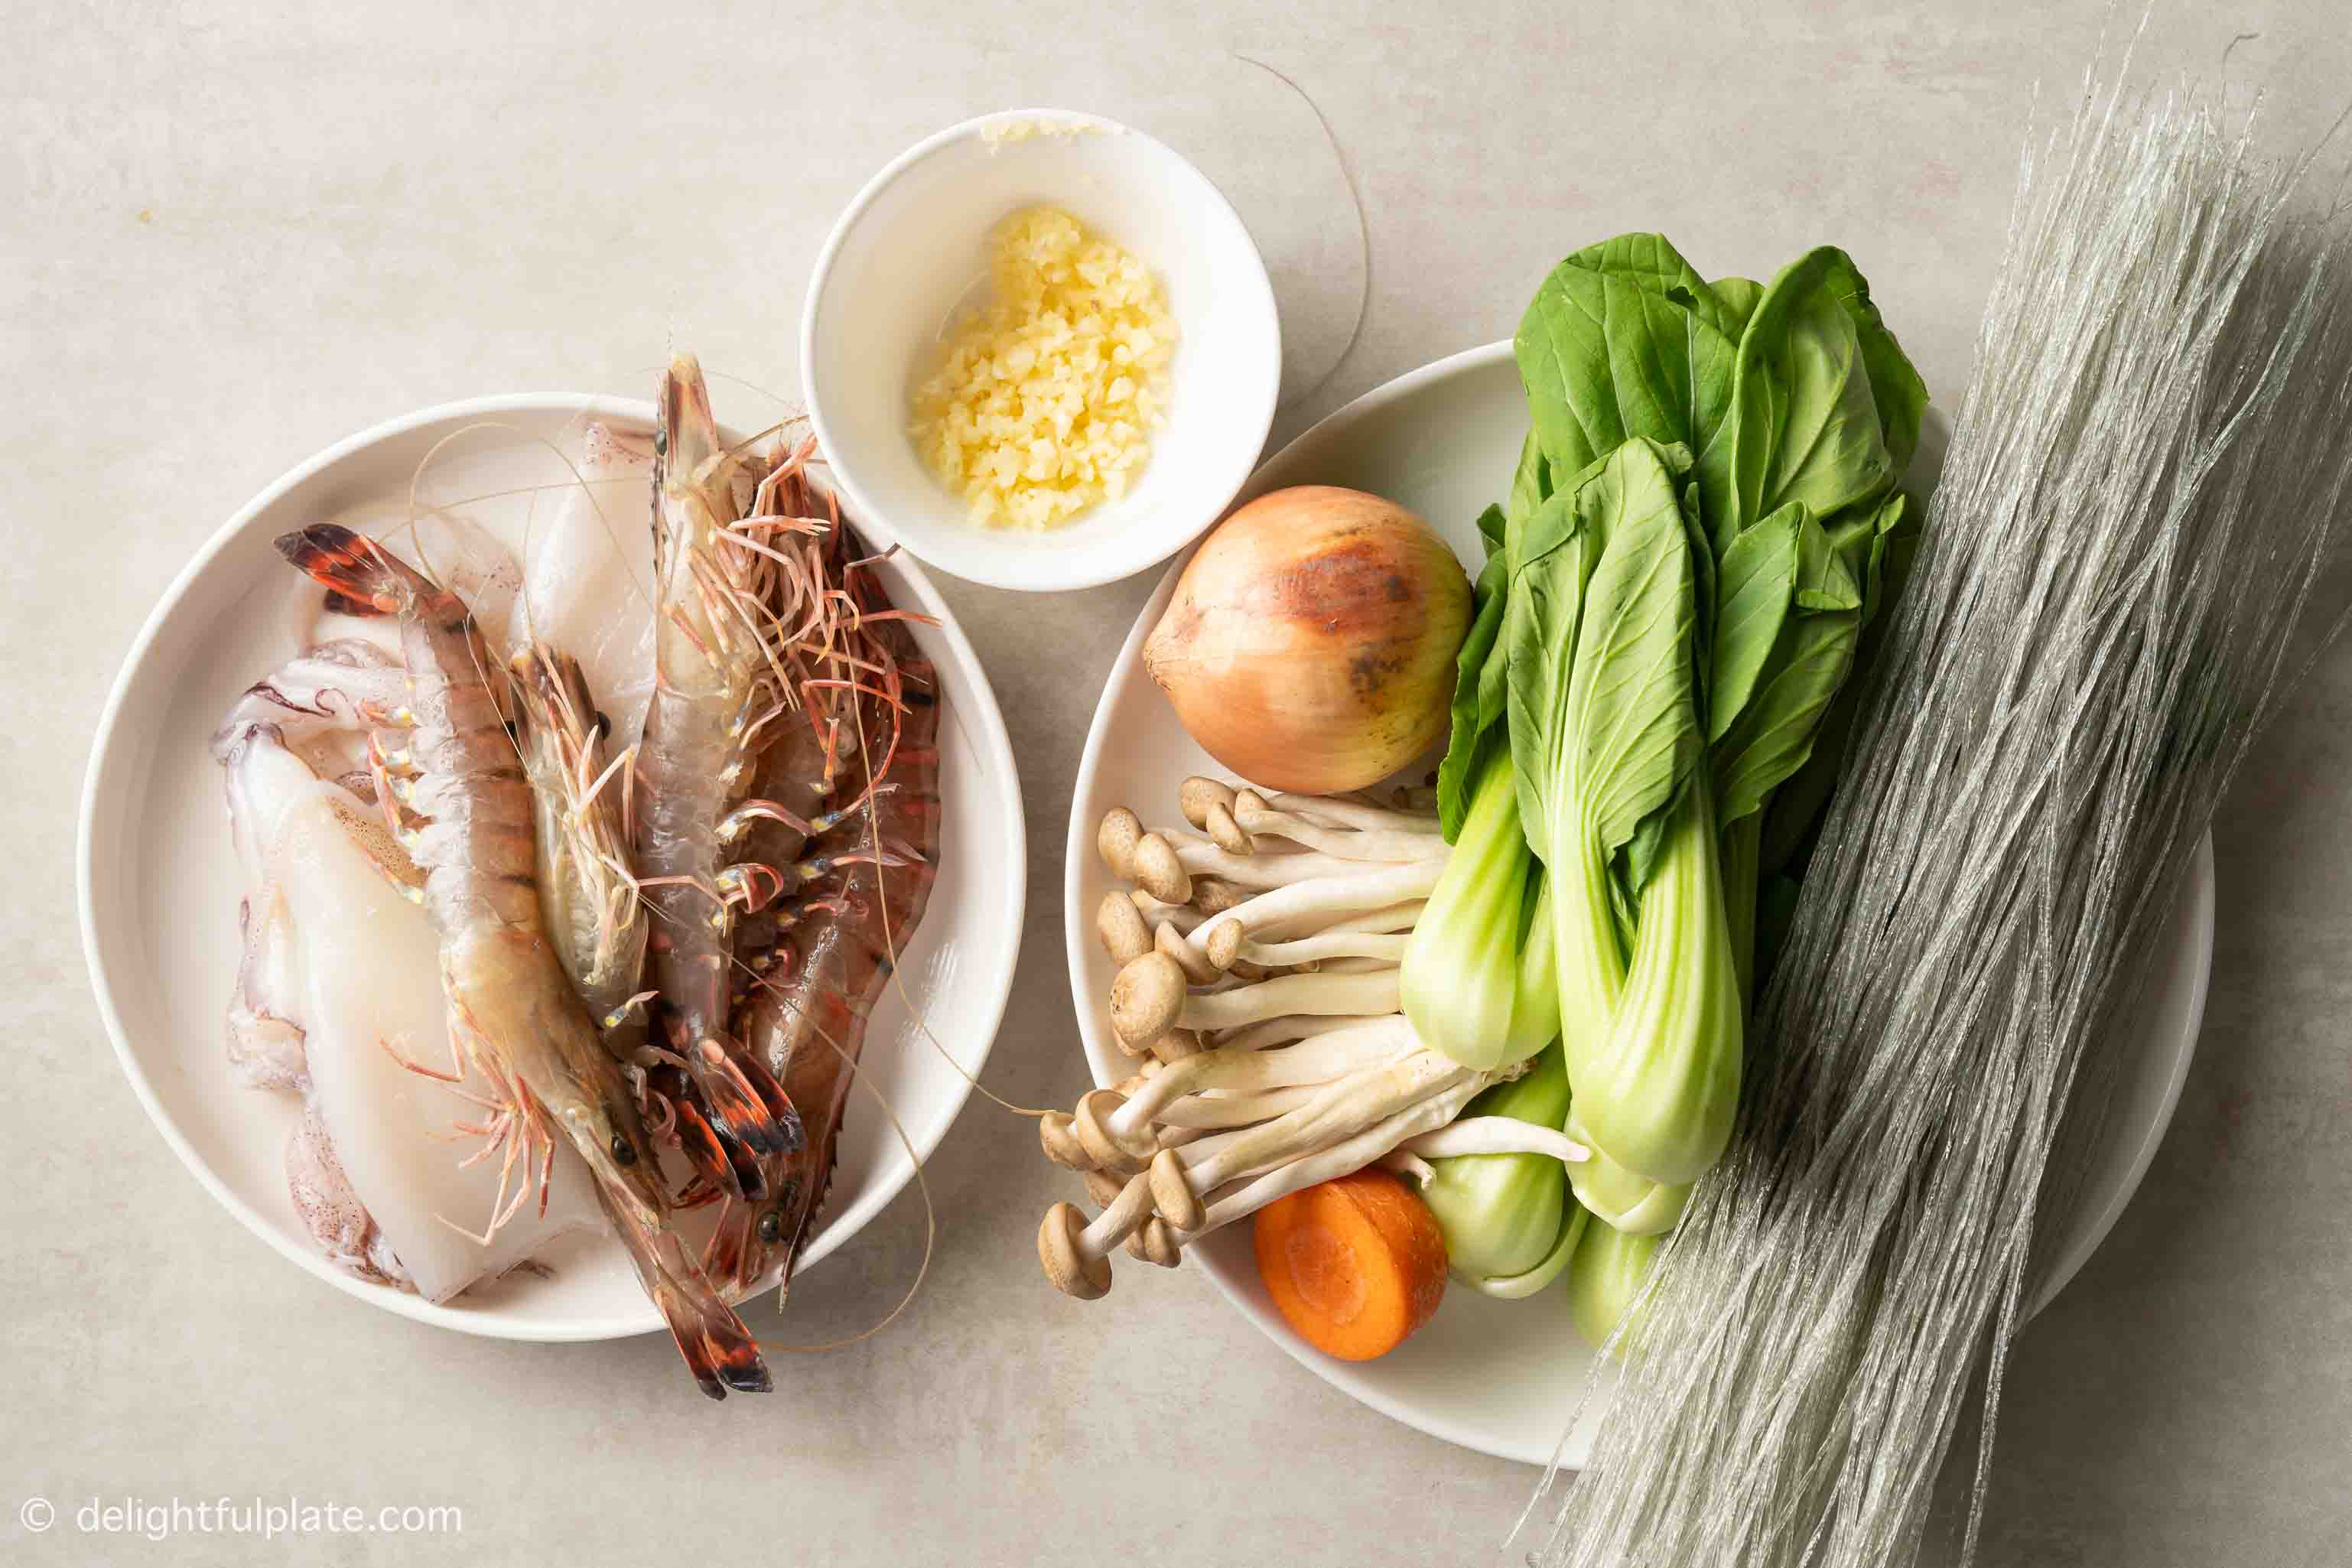 plates containing glass noodles, seafood and vegetables for the recipe.